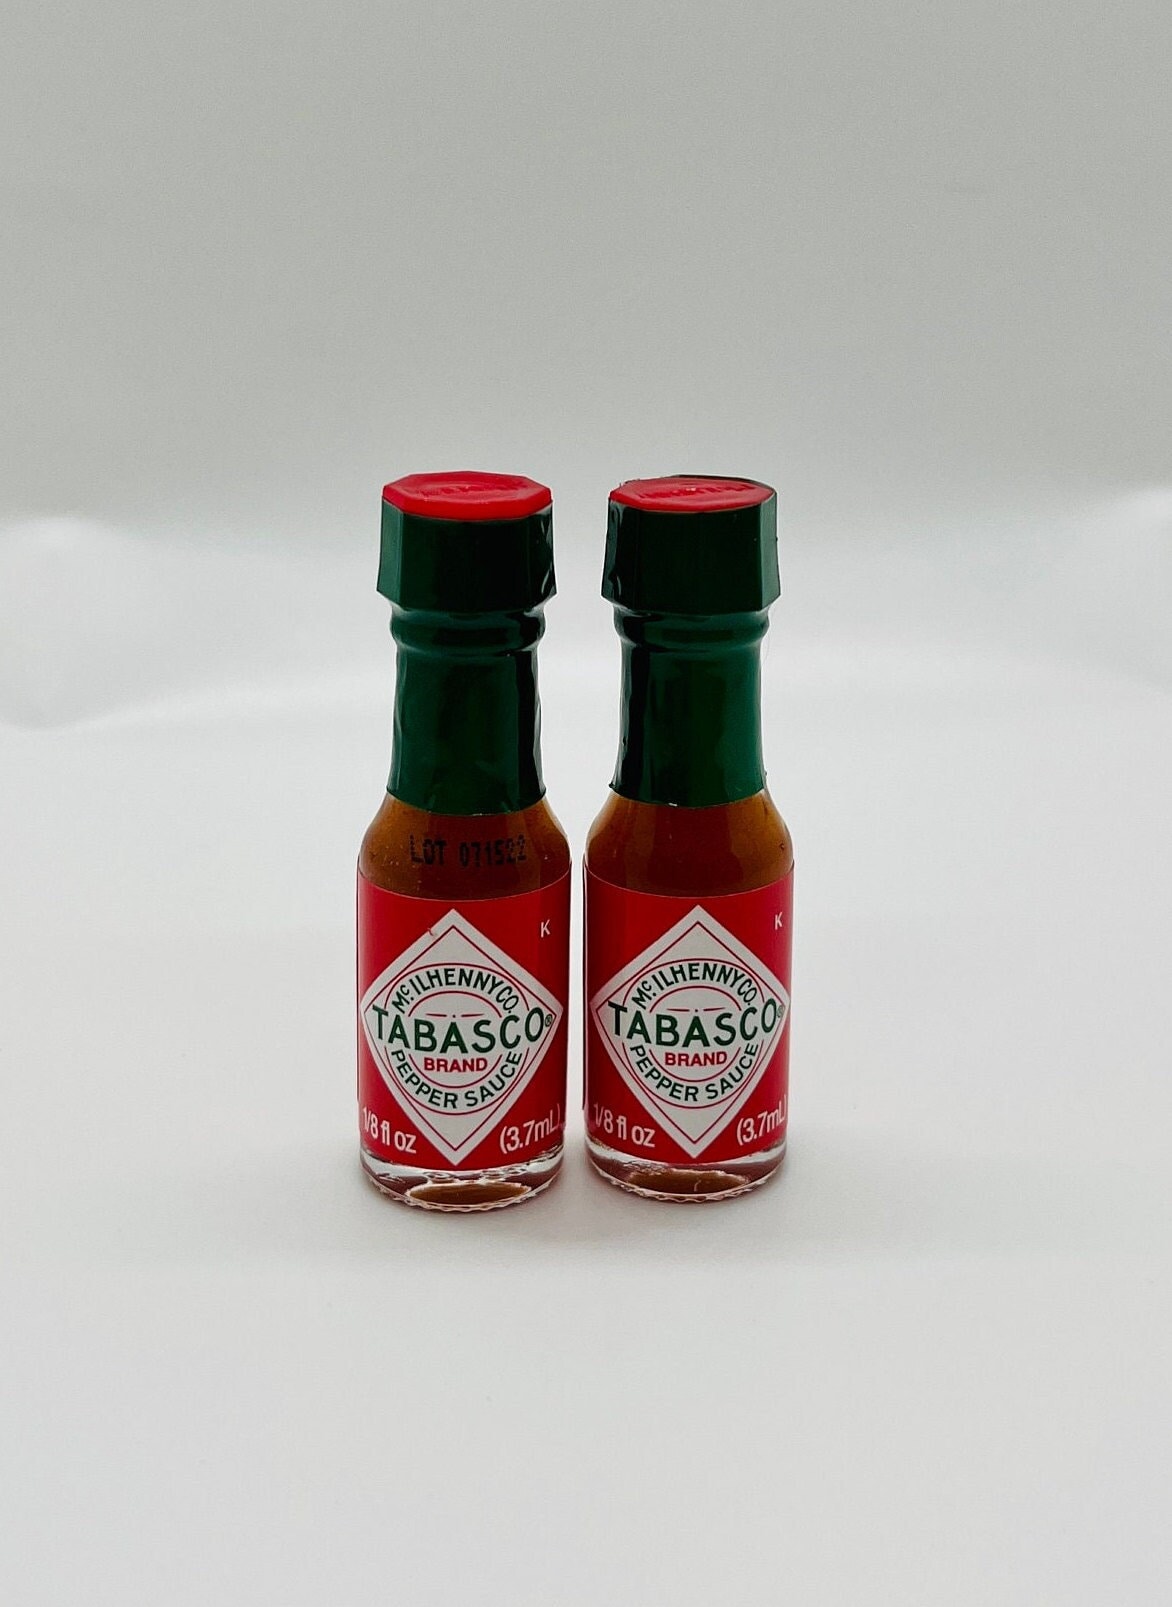 Mini Tabasco Hot Sauce Keychain - Includes 3 Mini Hot Sauce Bottles (.35oz)  With Travel Hot Sauce Key Chain and Refill Funnel - Red Tabasco Hot Sauce